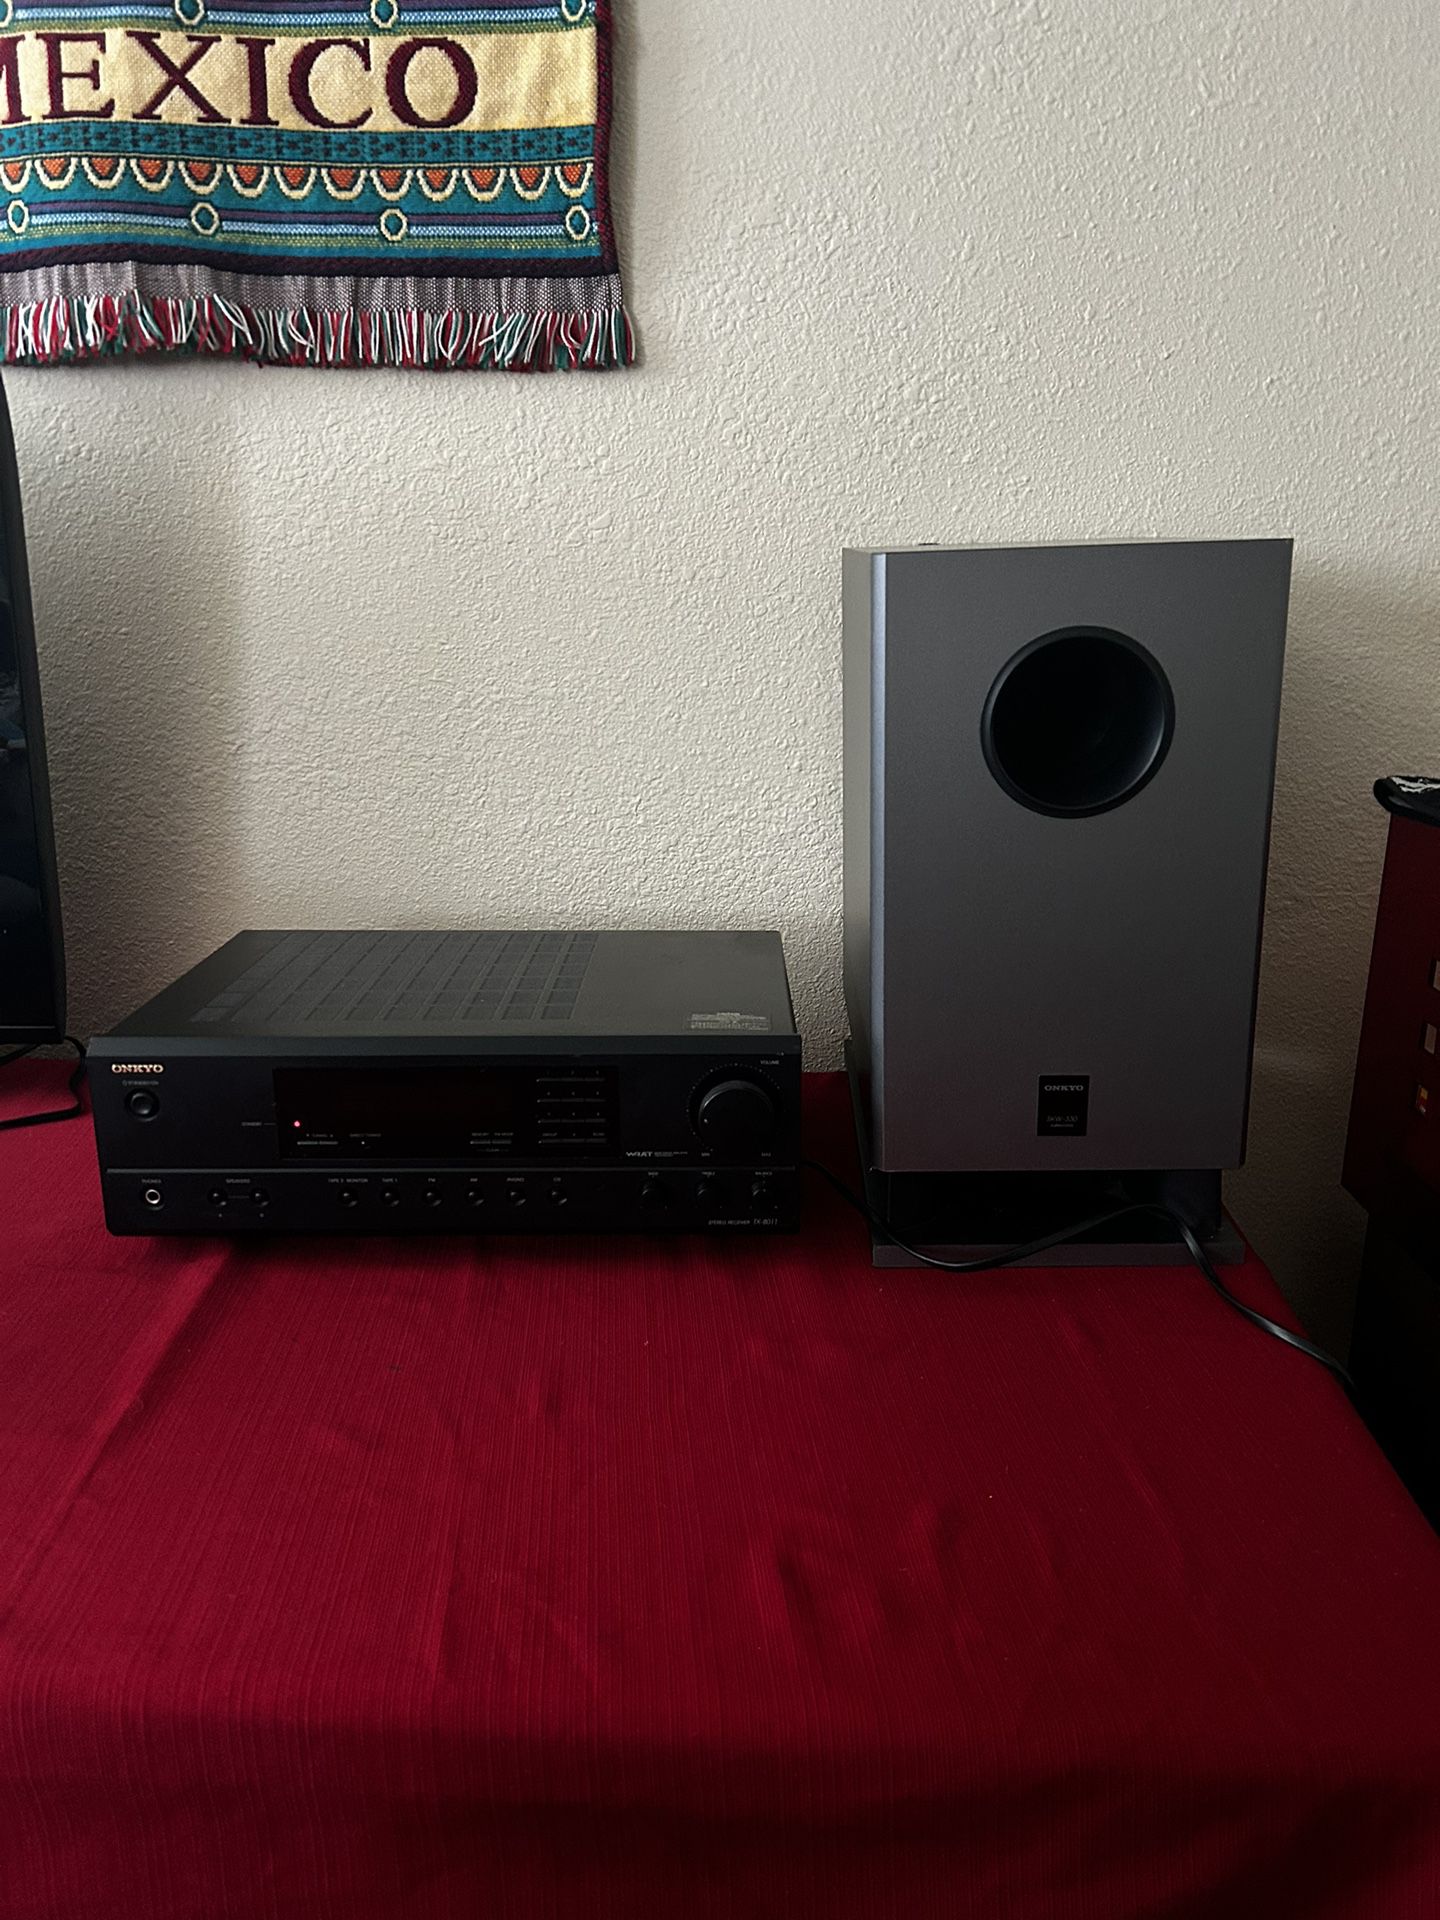 Onkyo Subwoofer And Onkyo Amplifier Receiver